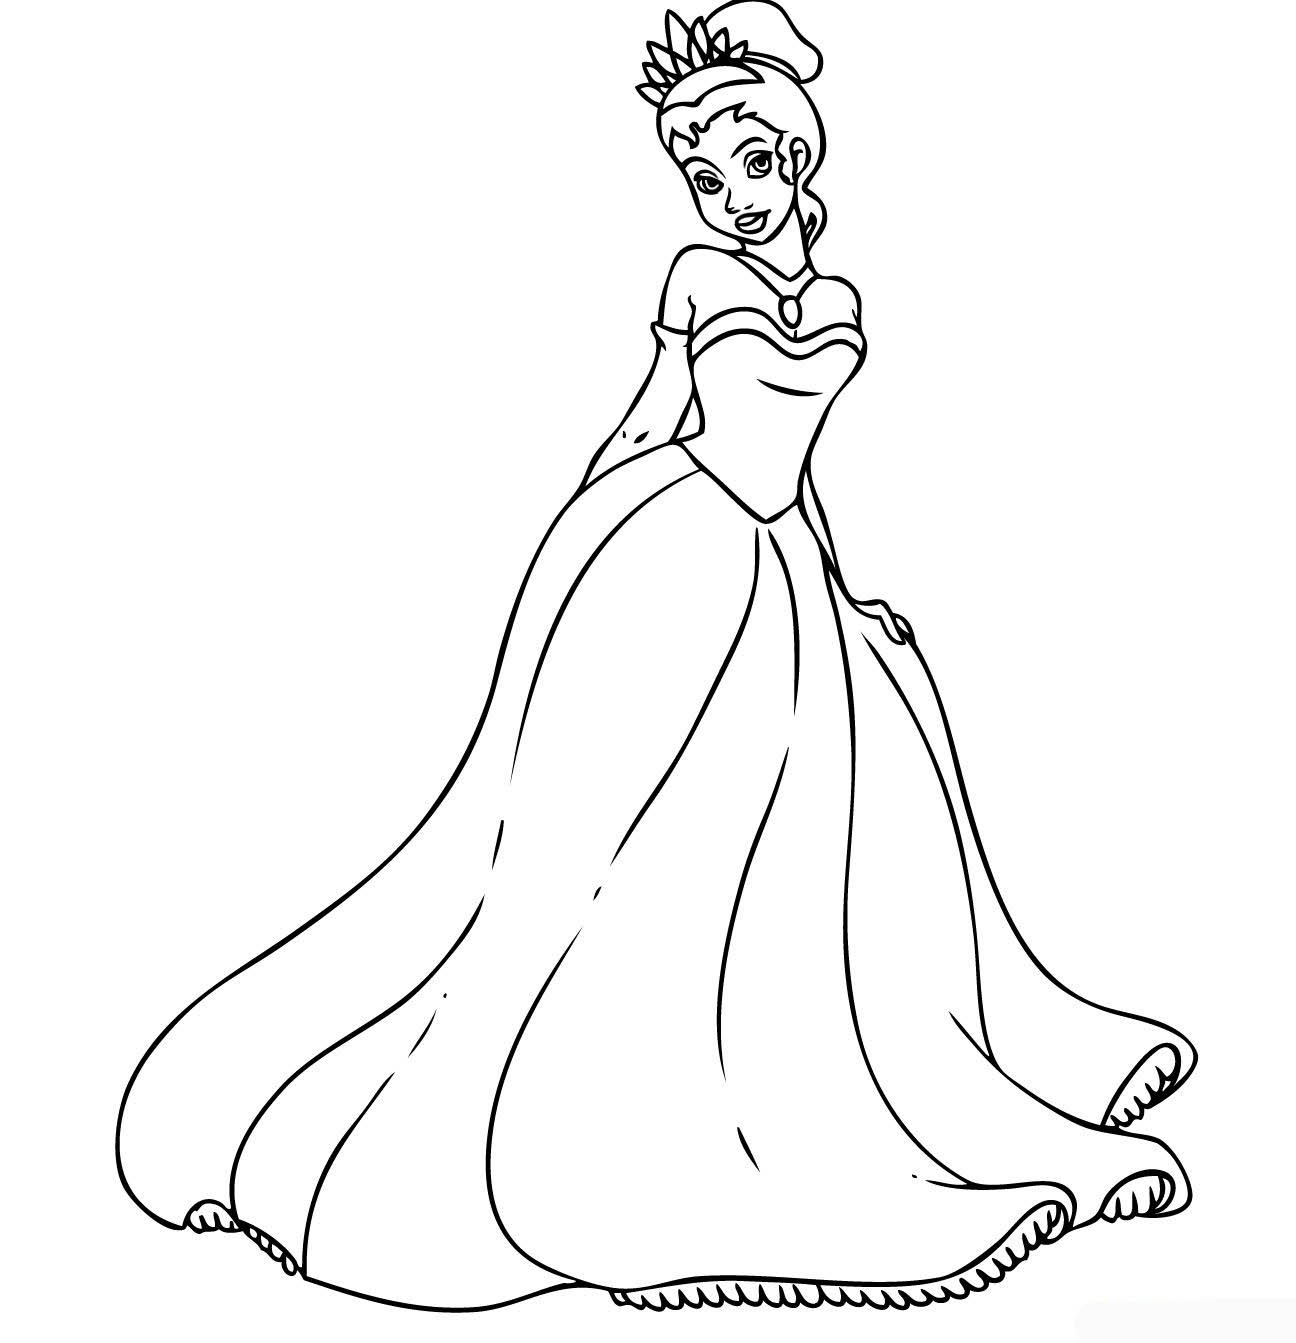  Princess Tiana Coloring Pages For Girls